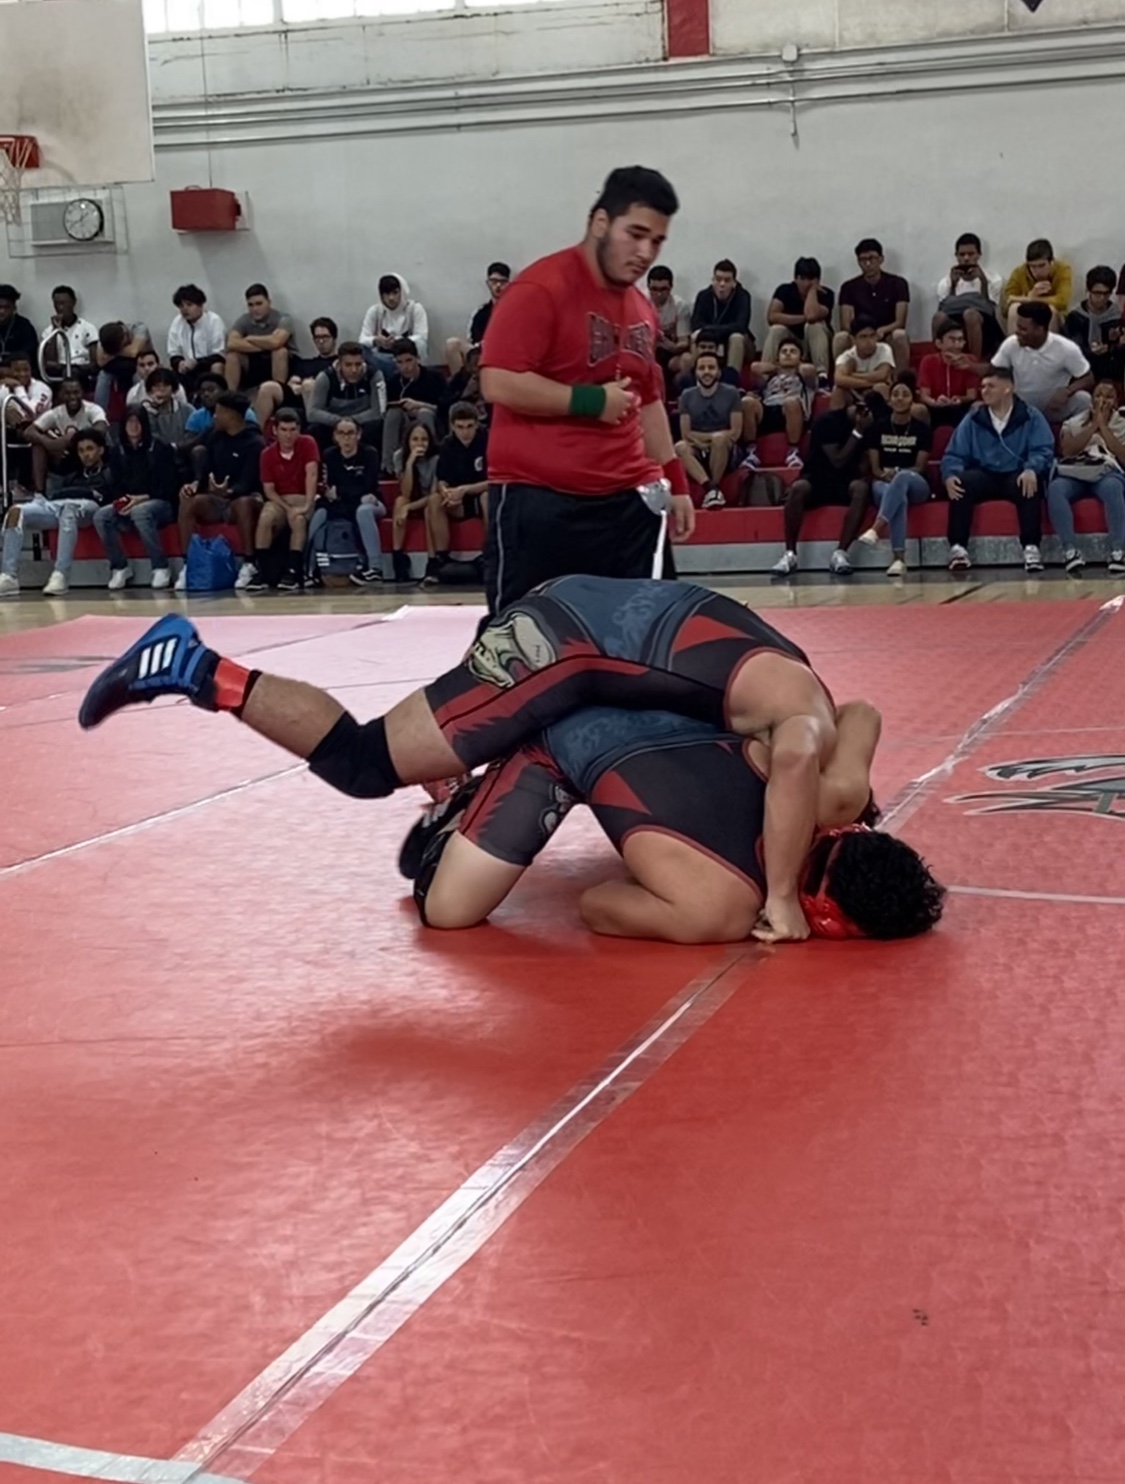 Gables+Wrestling+Team%3A+One+on+One+Match